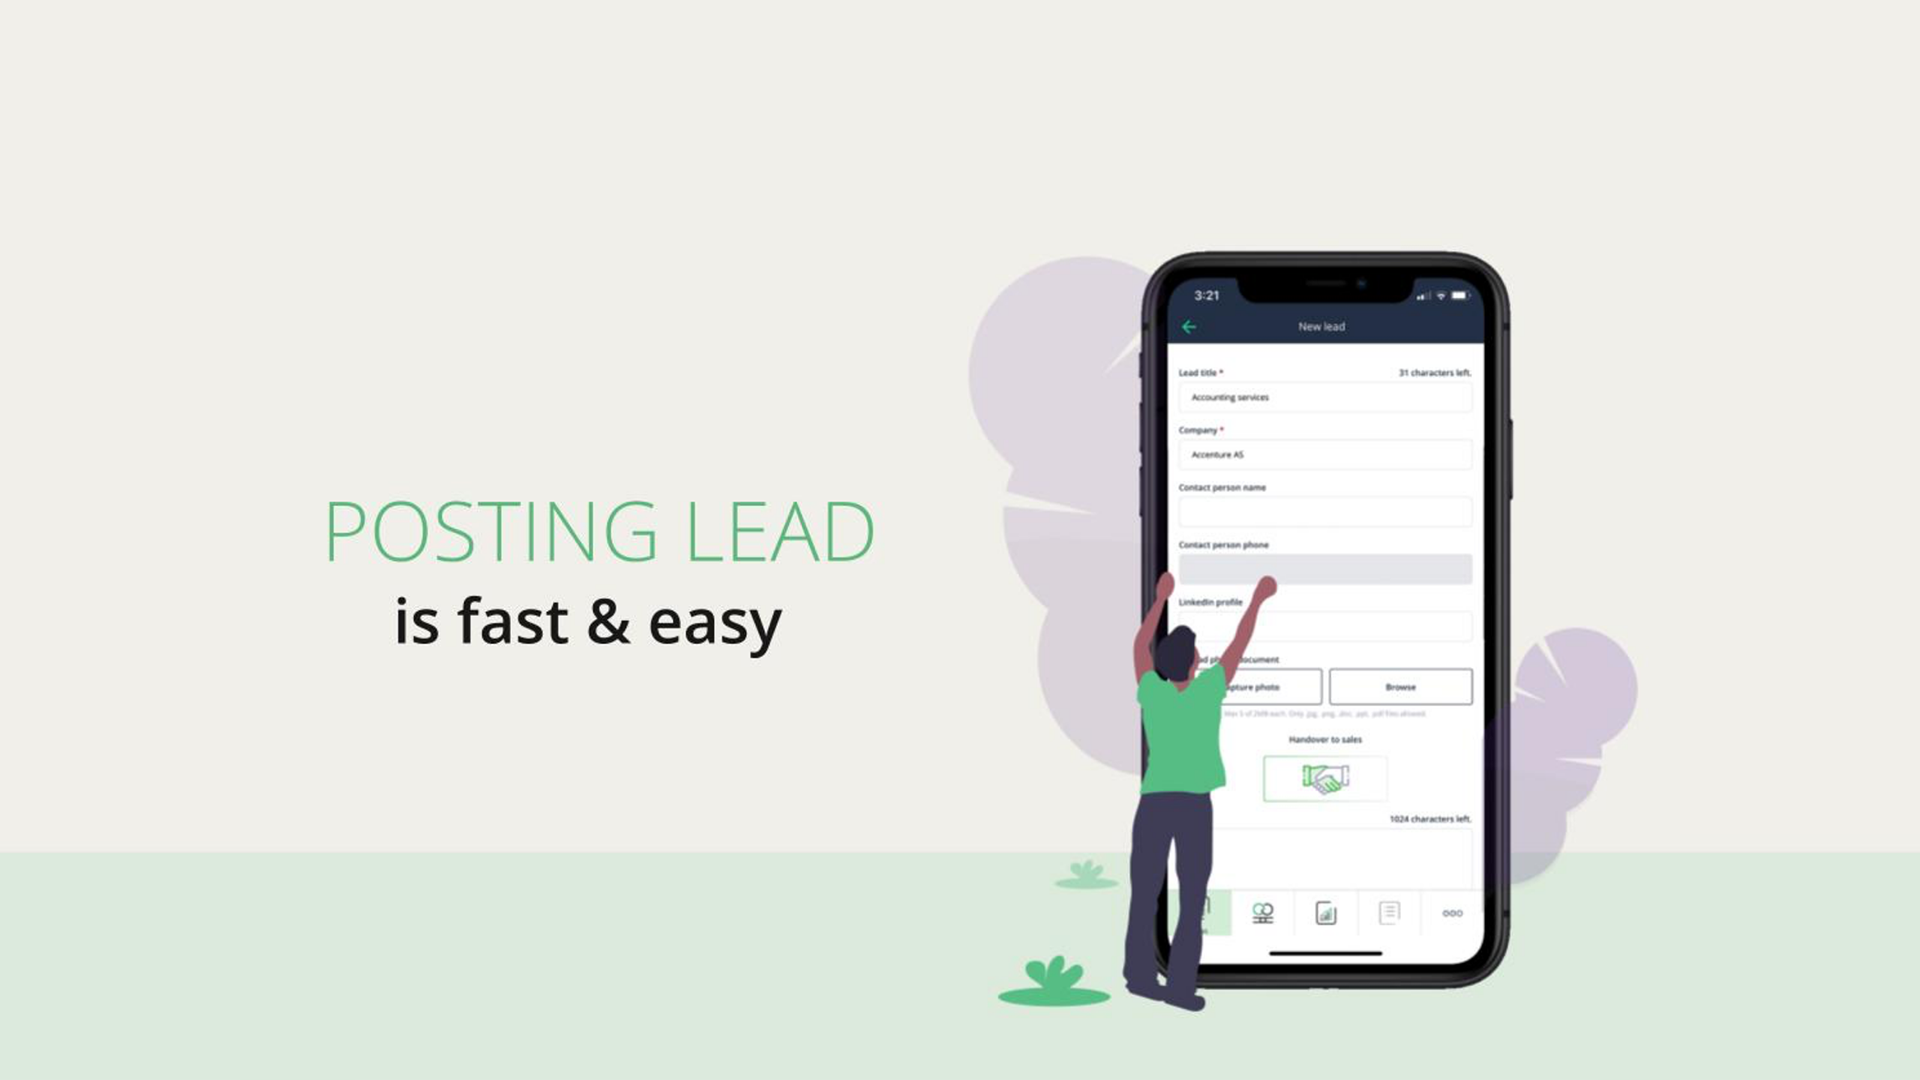 Fast and easy posting of leads